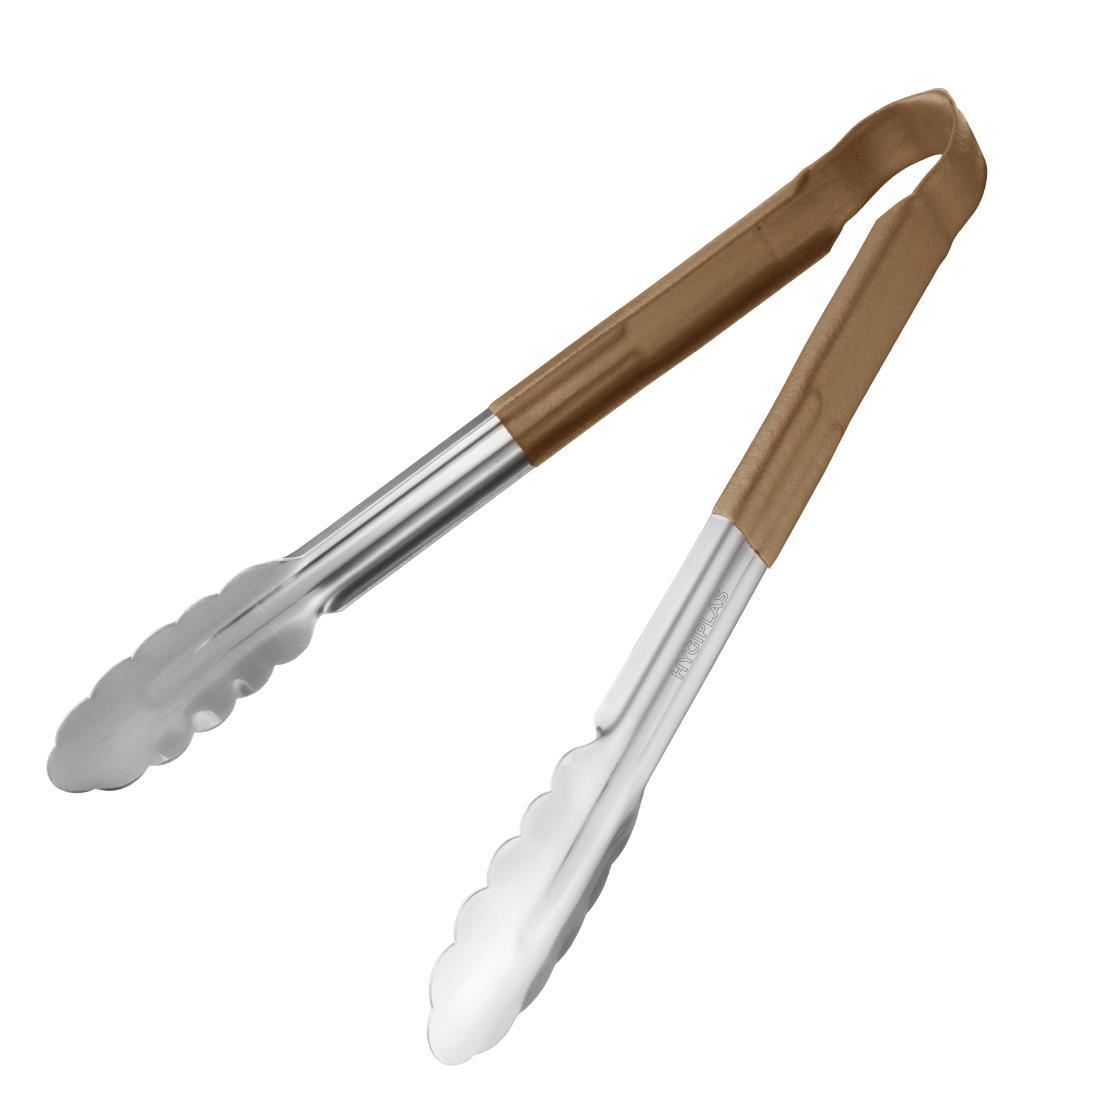 Hygiplas Colour Coded Brown Serving Tongs 11" - CB158  - 1